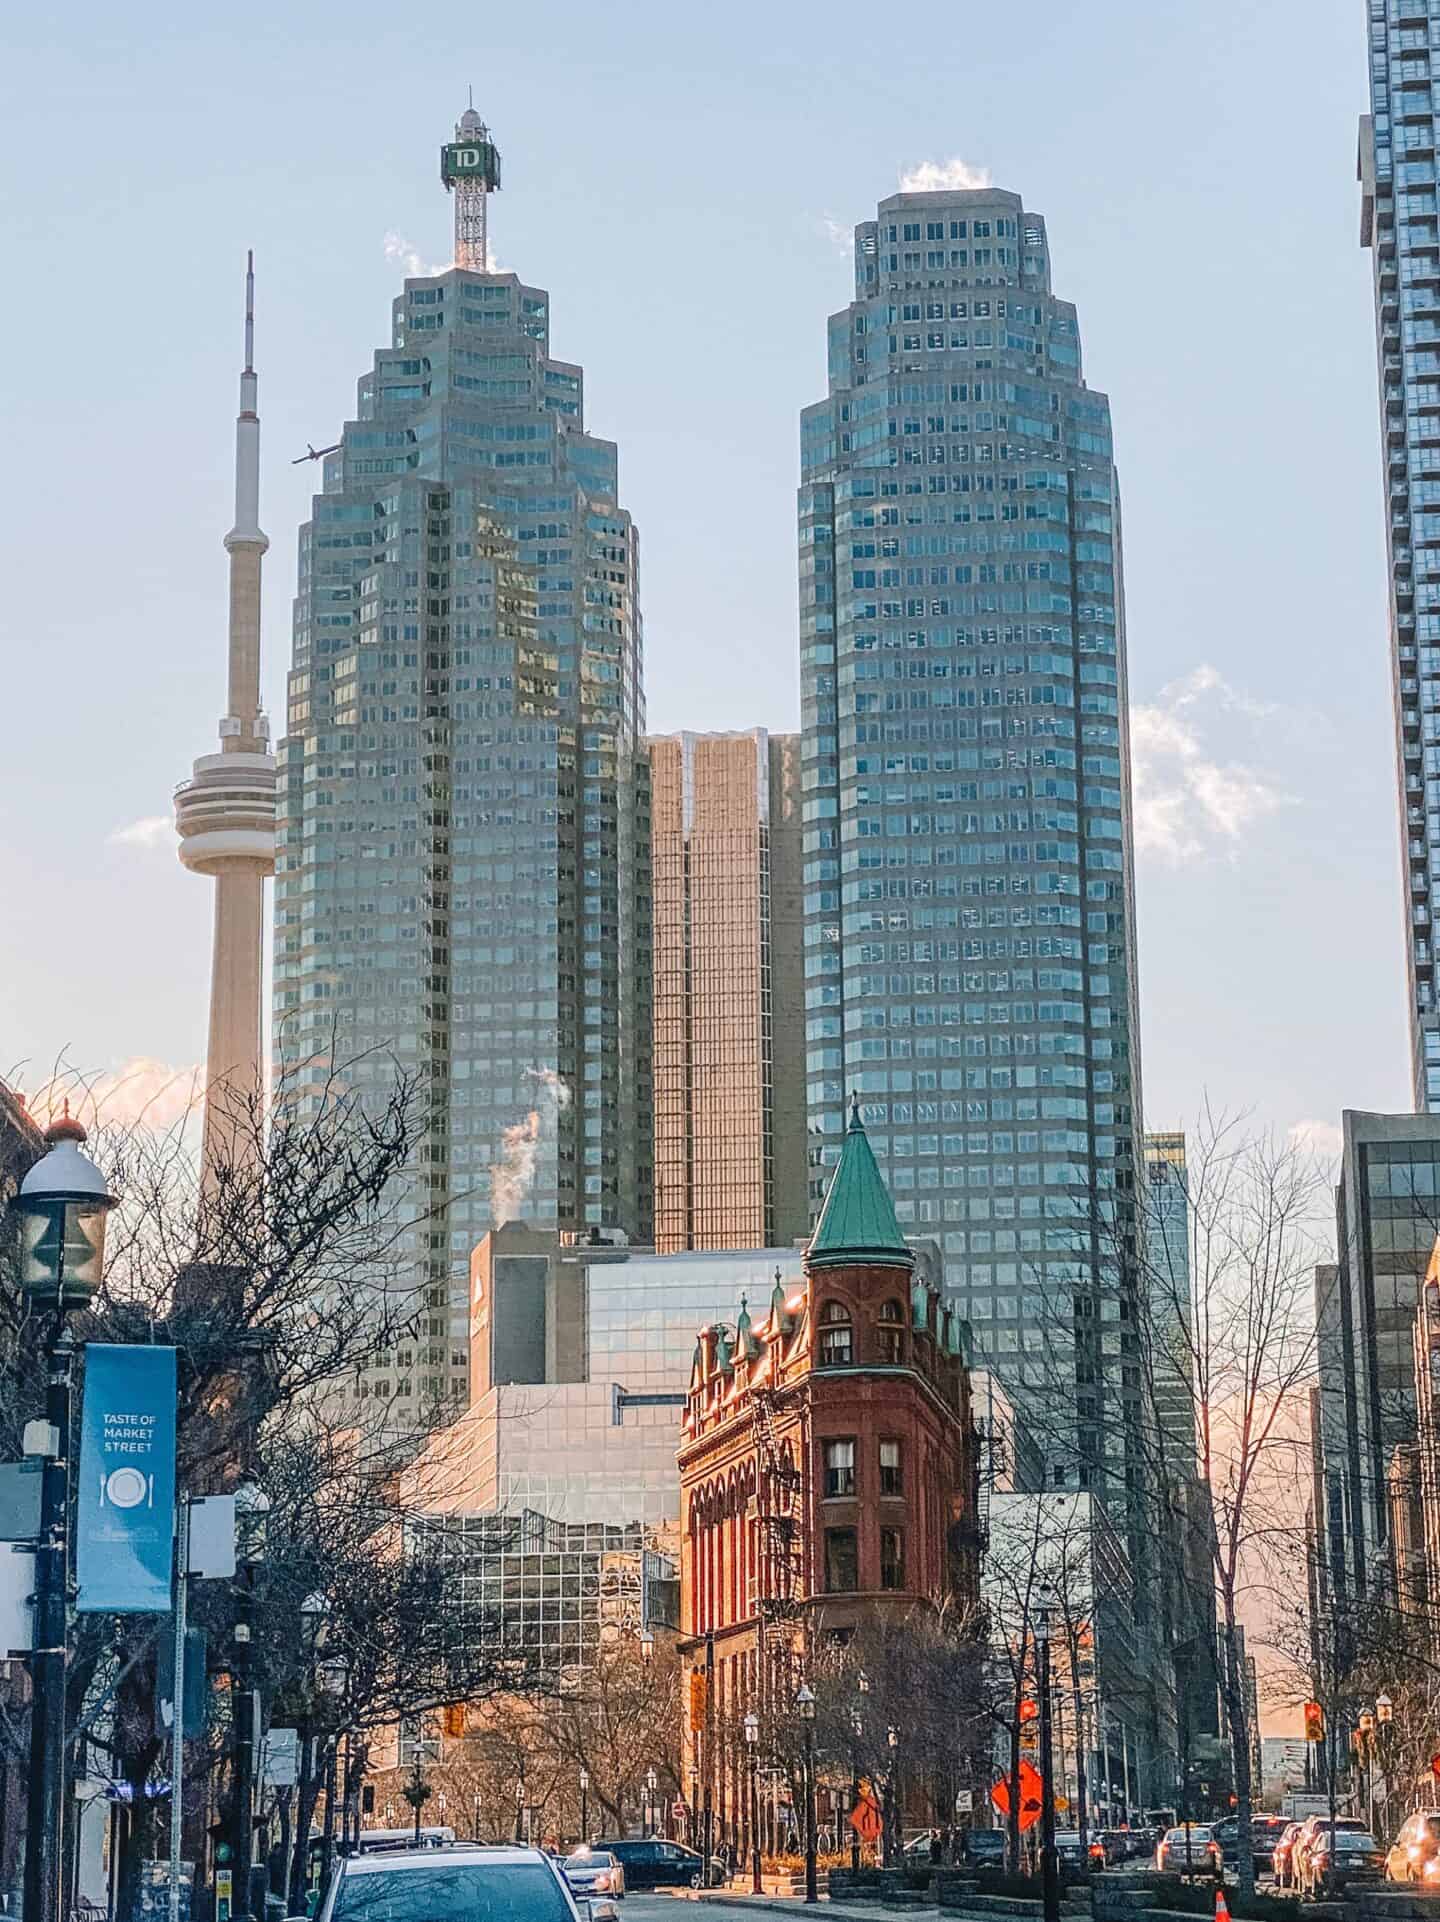 The Gooderham or "Flat Iron" building in Toronto 